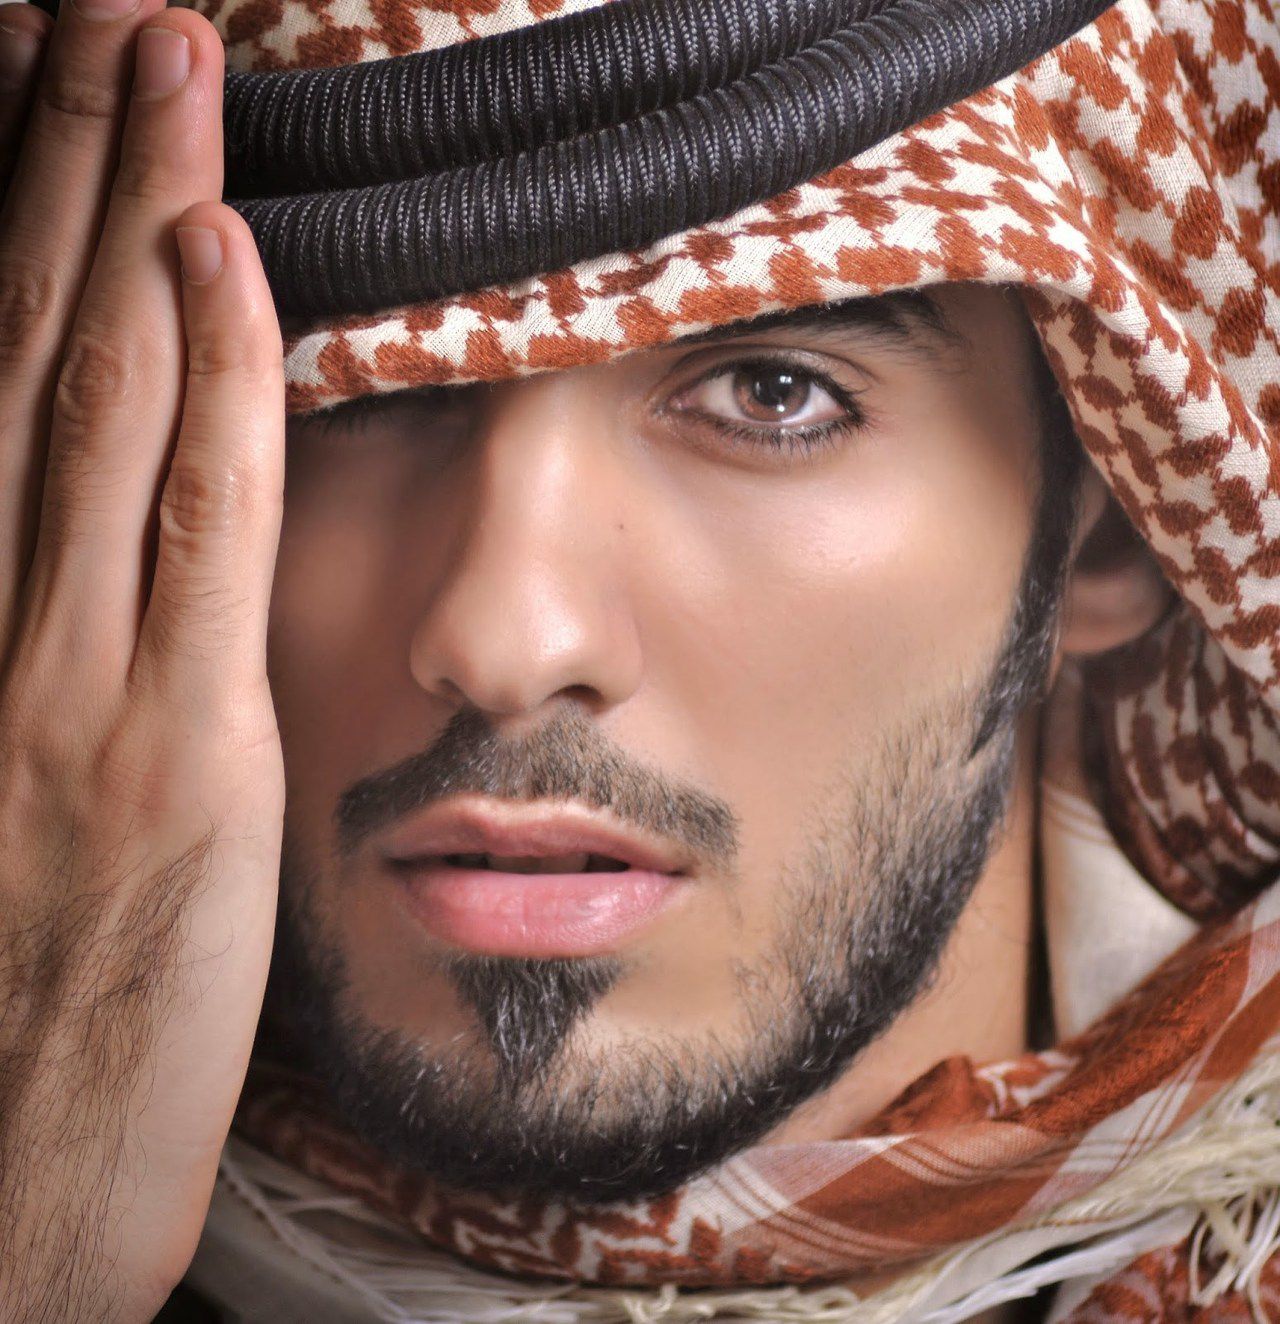 Omar Borkan Al Gala Deported From Saudi Arabia for Being 'Too Handsome'